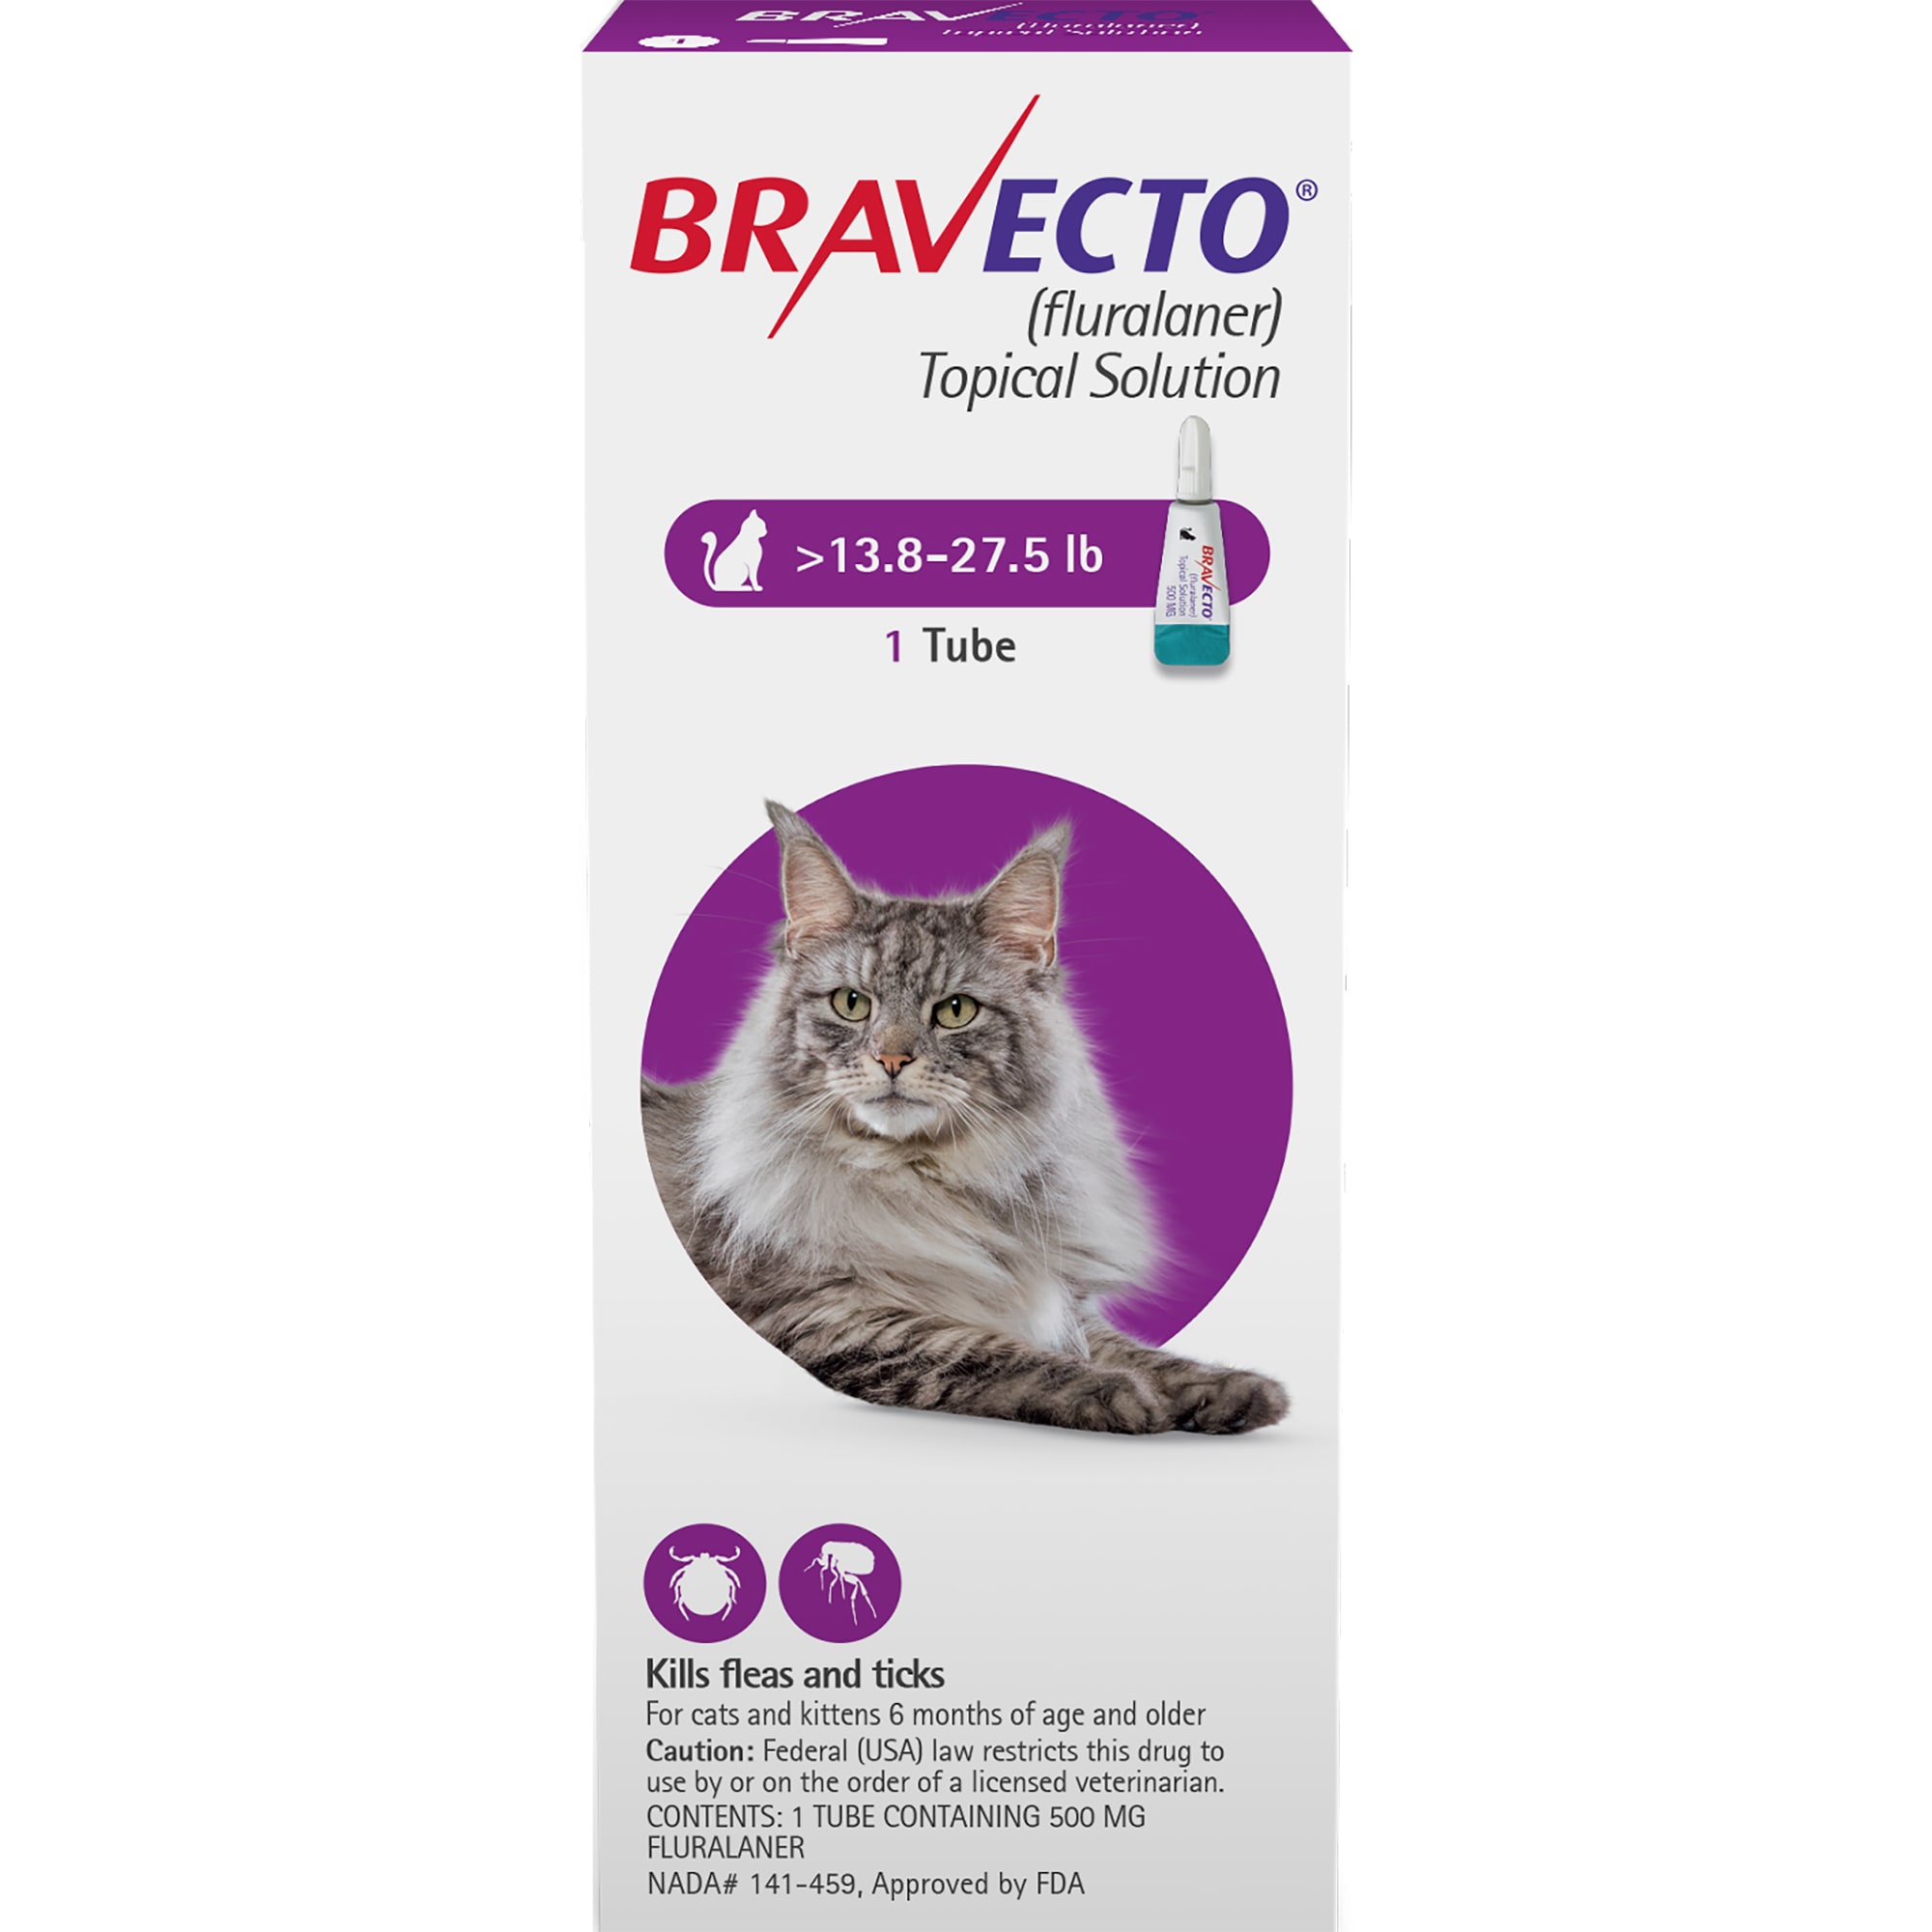 Bravecto Topical Solution For Cats 13.8-27.5 Lbs, 3 Month Supply | Petco